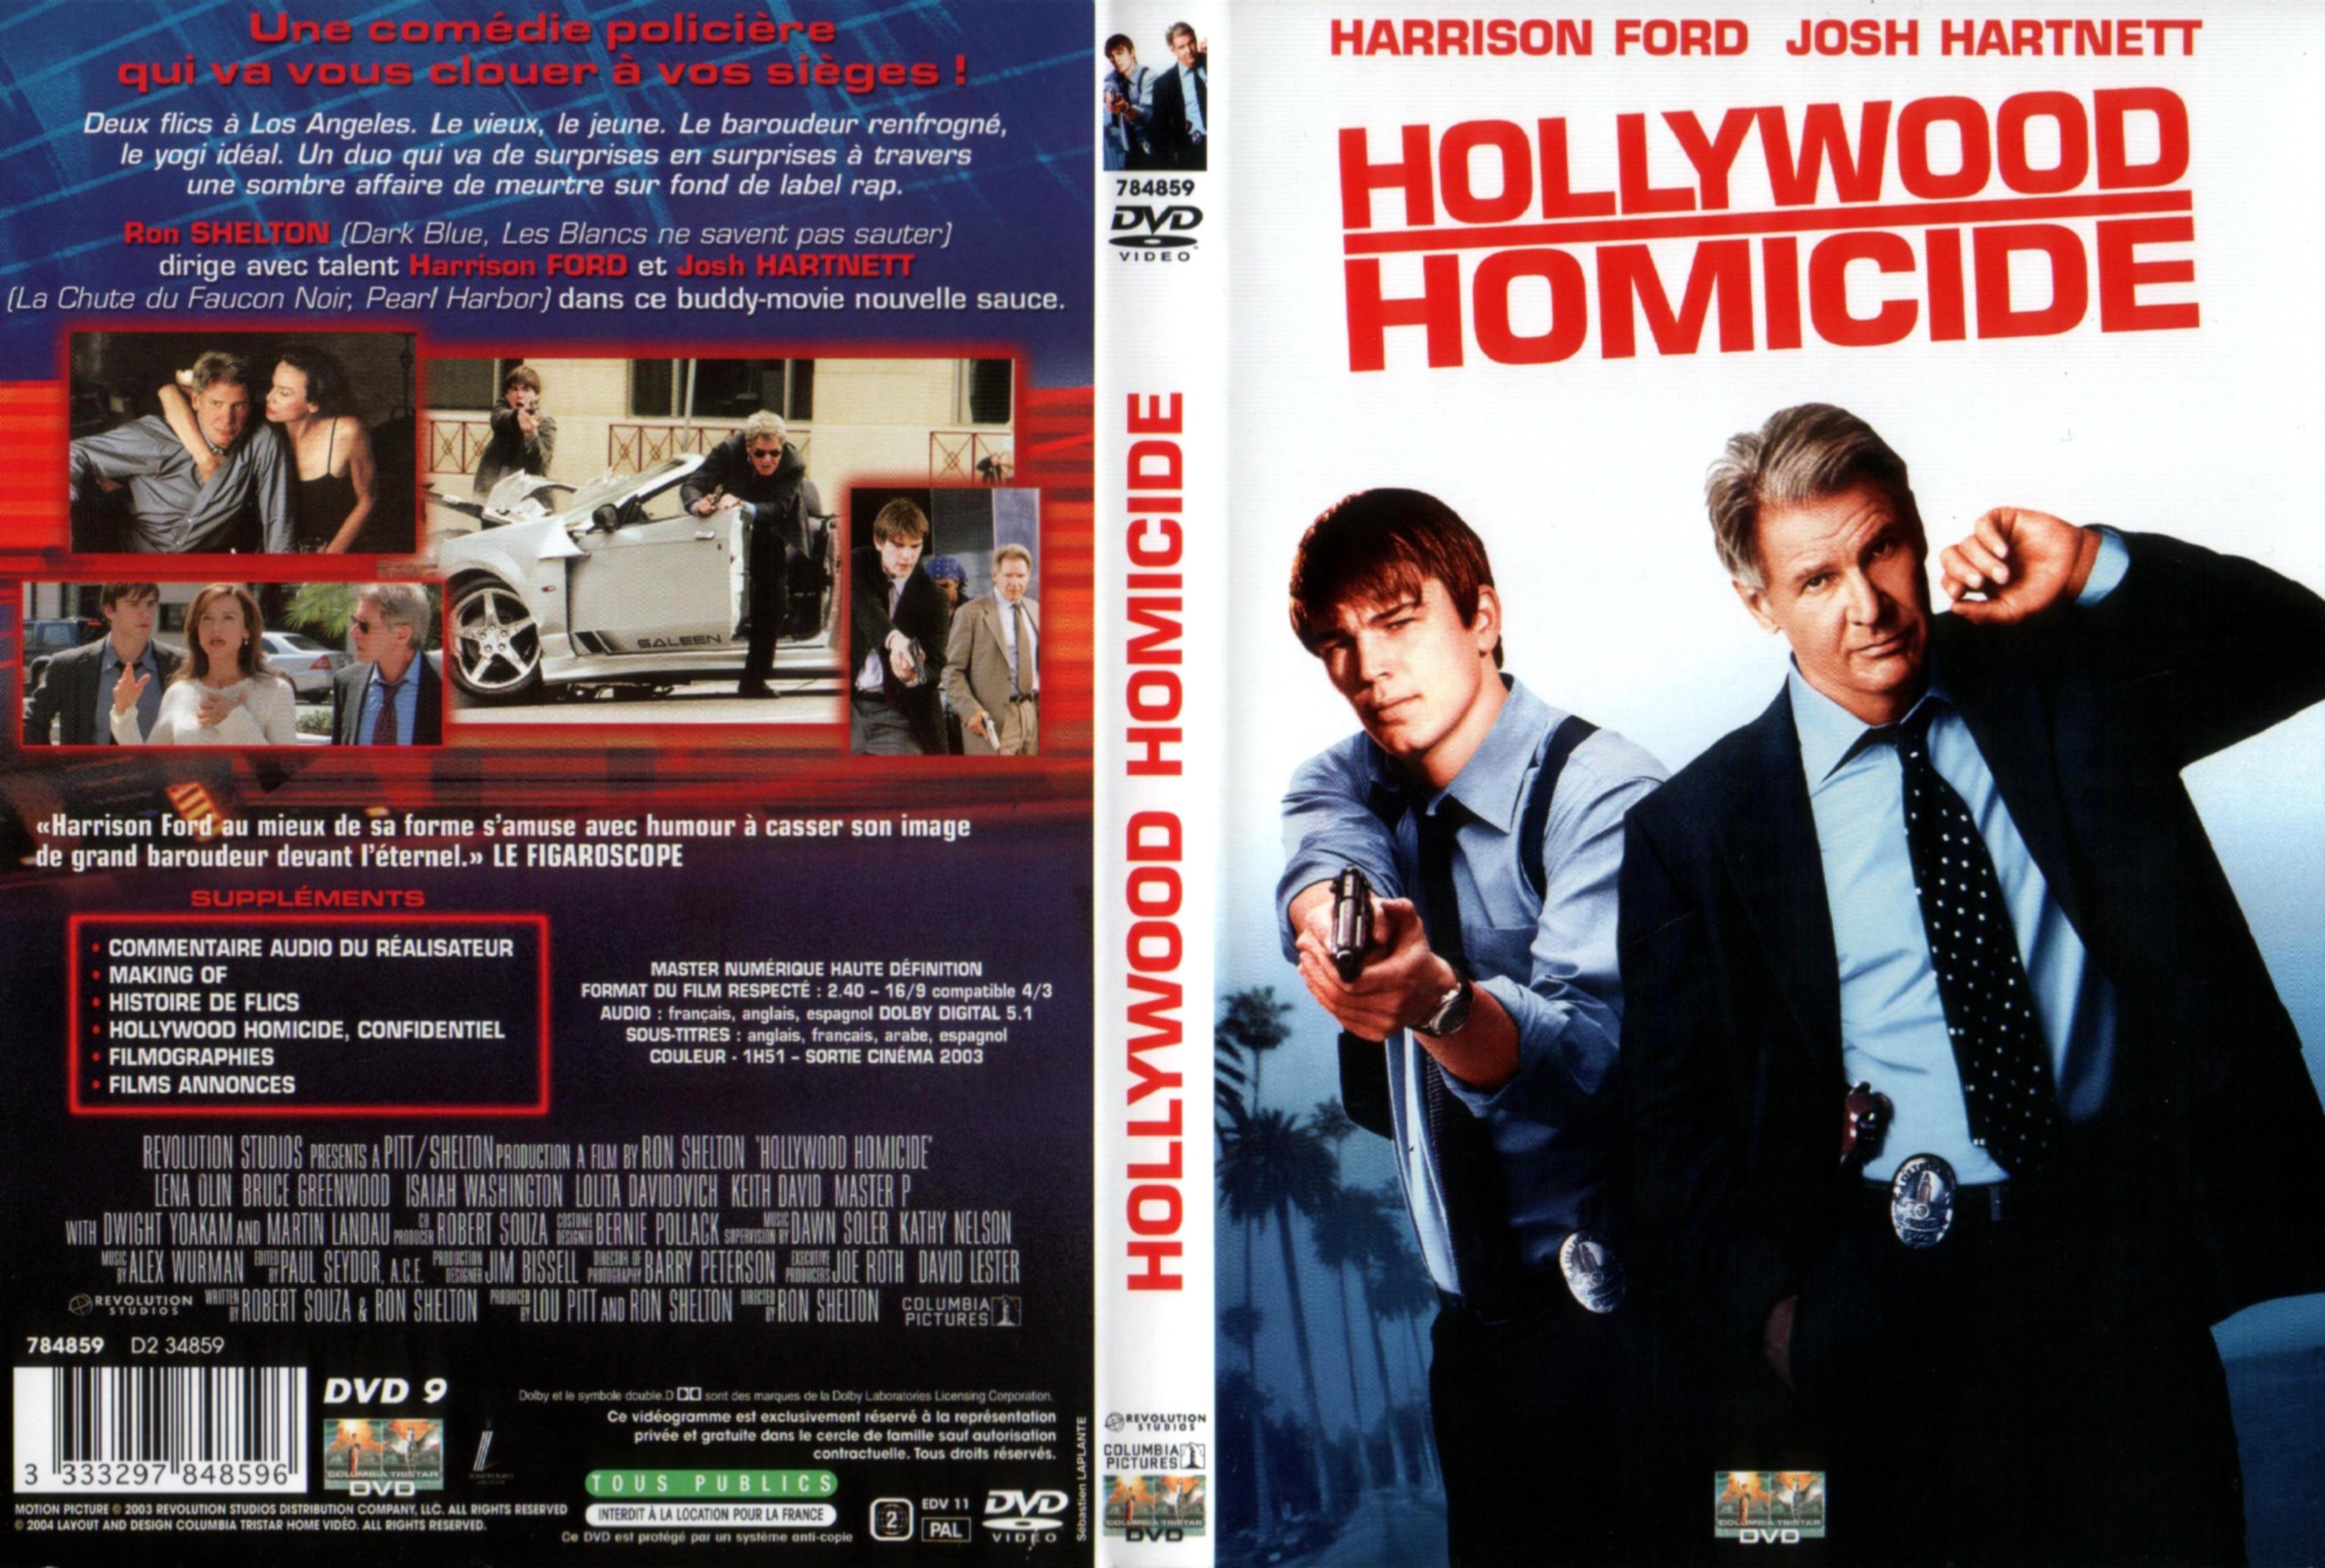 Jaquette DVD Hollywood homicide